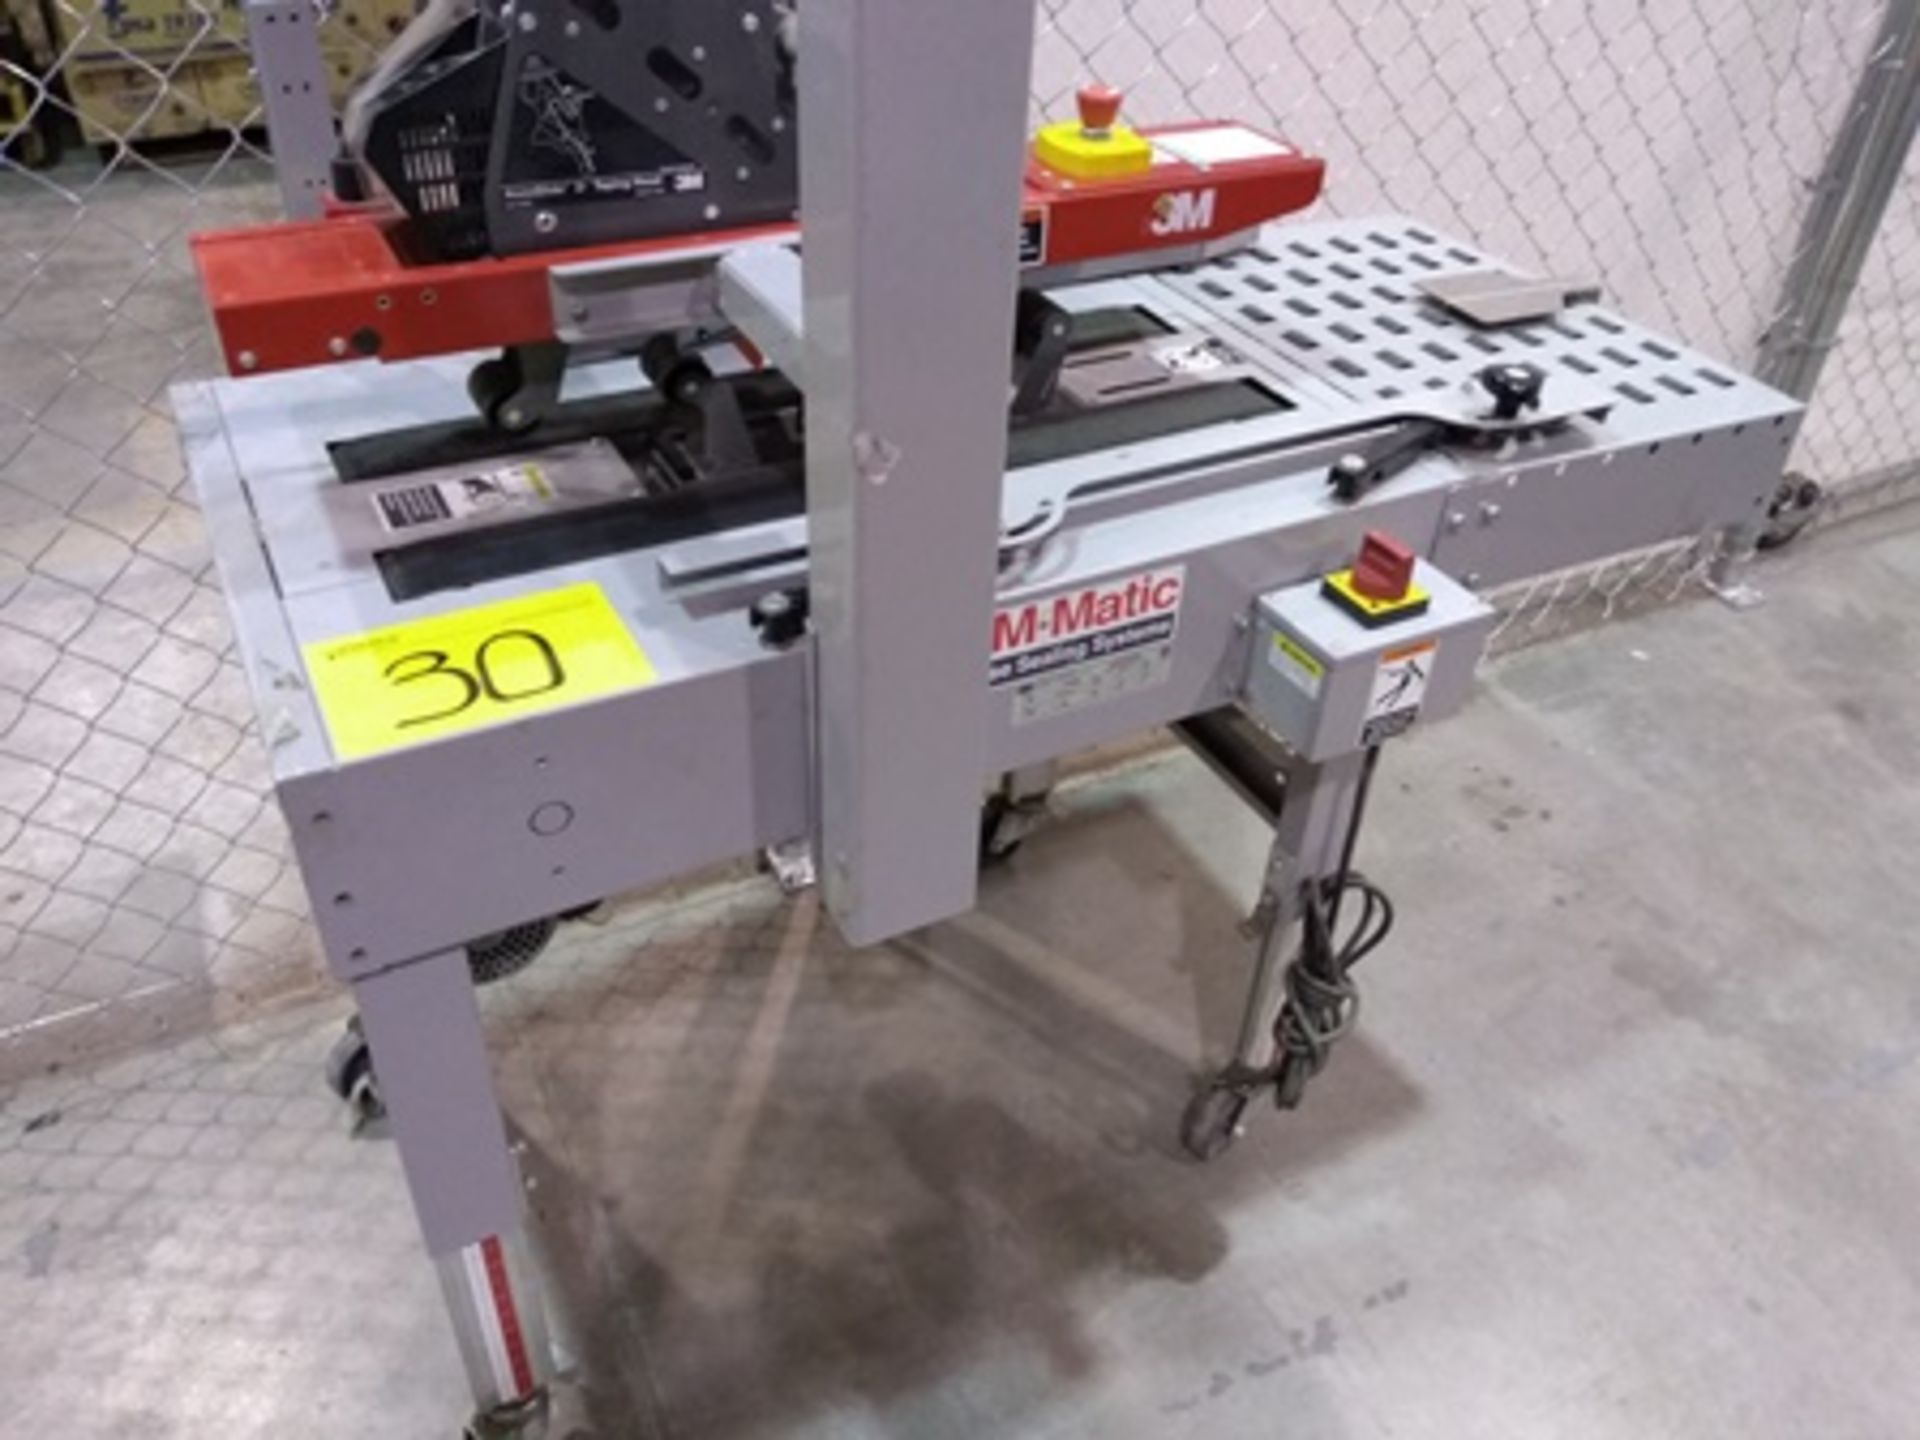 3M-Matic Case Sealing Systems, carton sealing machine mod. A20, serial number 51032, year 2014 … - Image 4 of 18